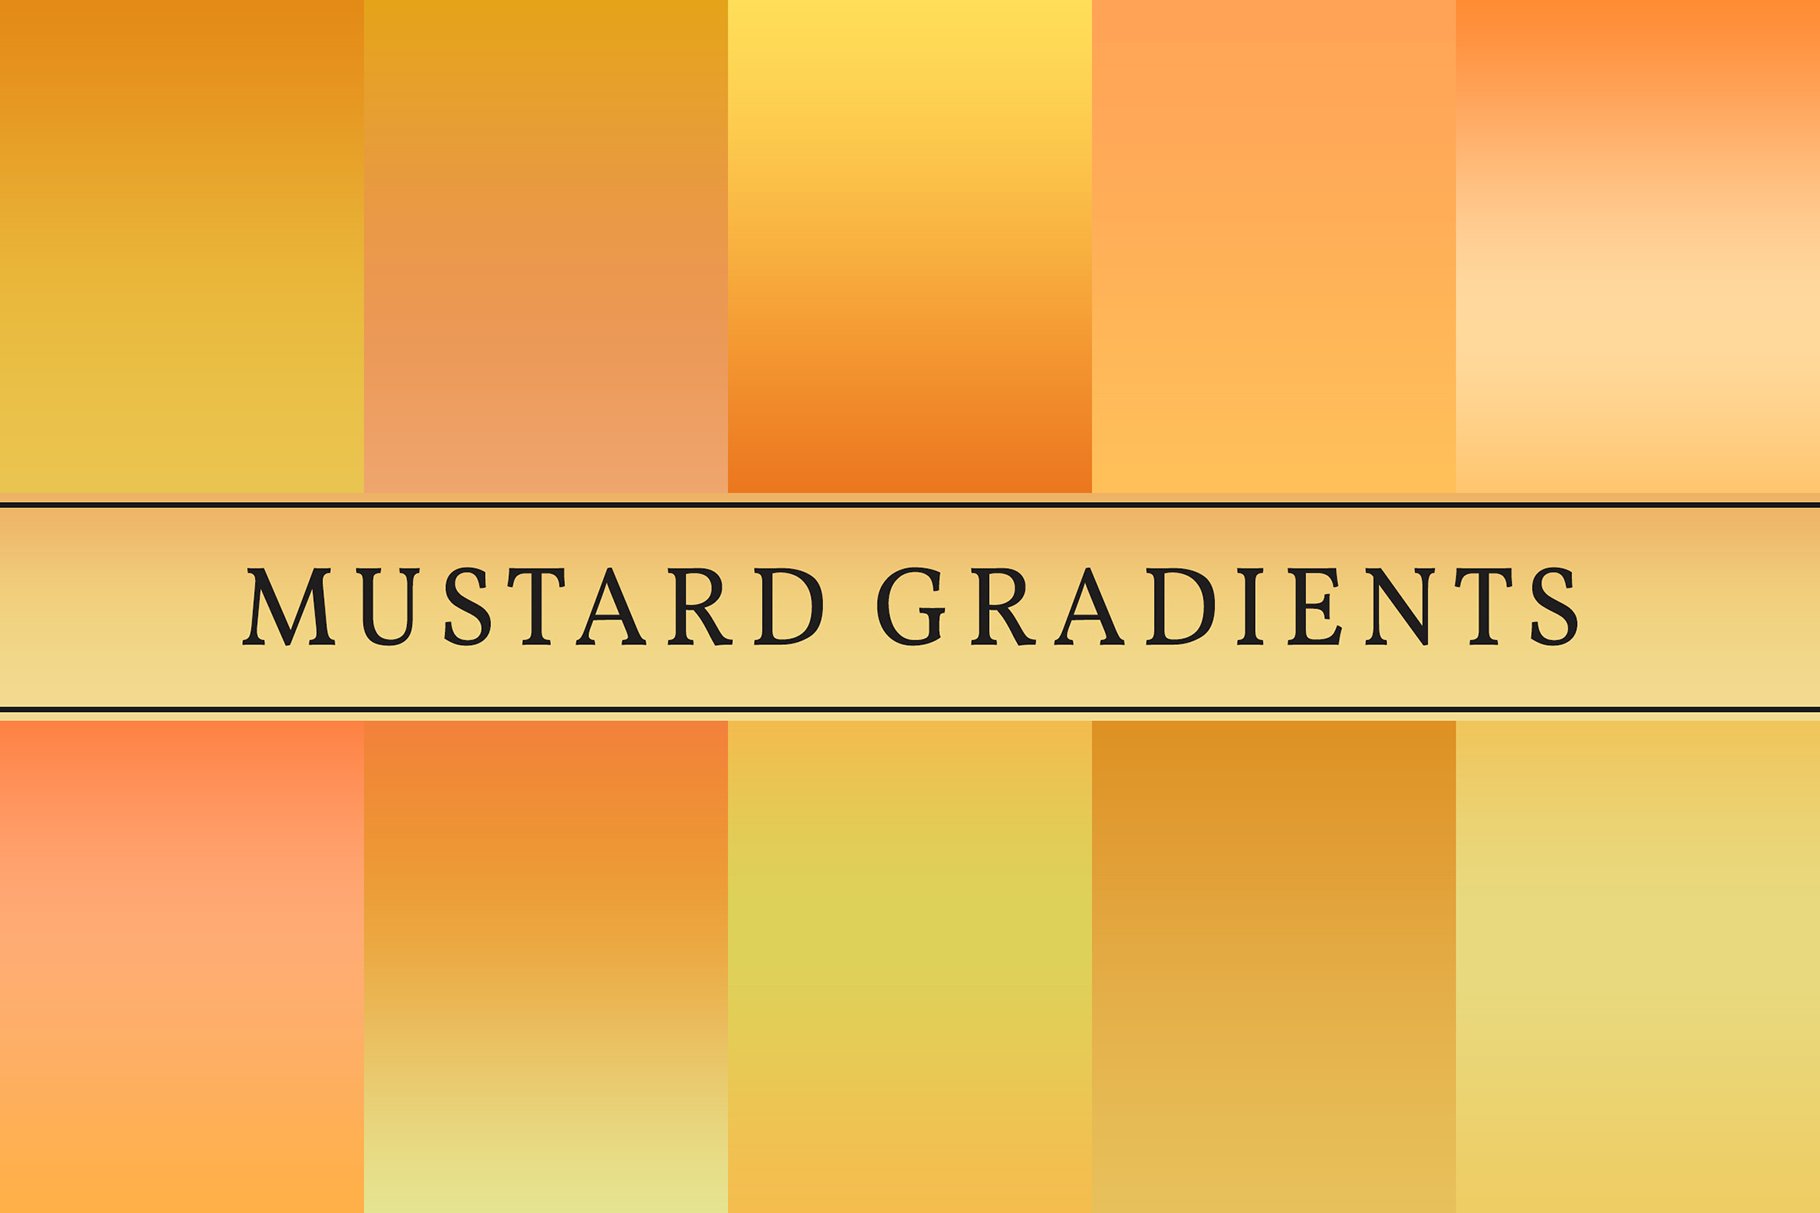 Mustard Gradients cover image.